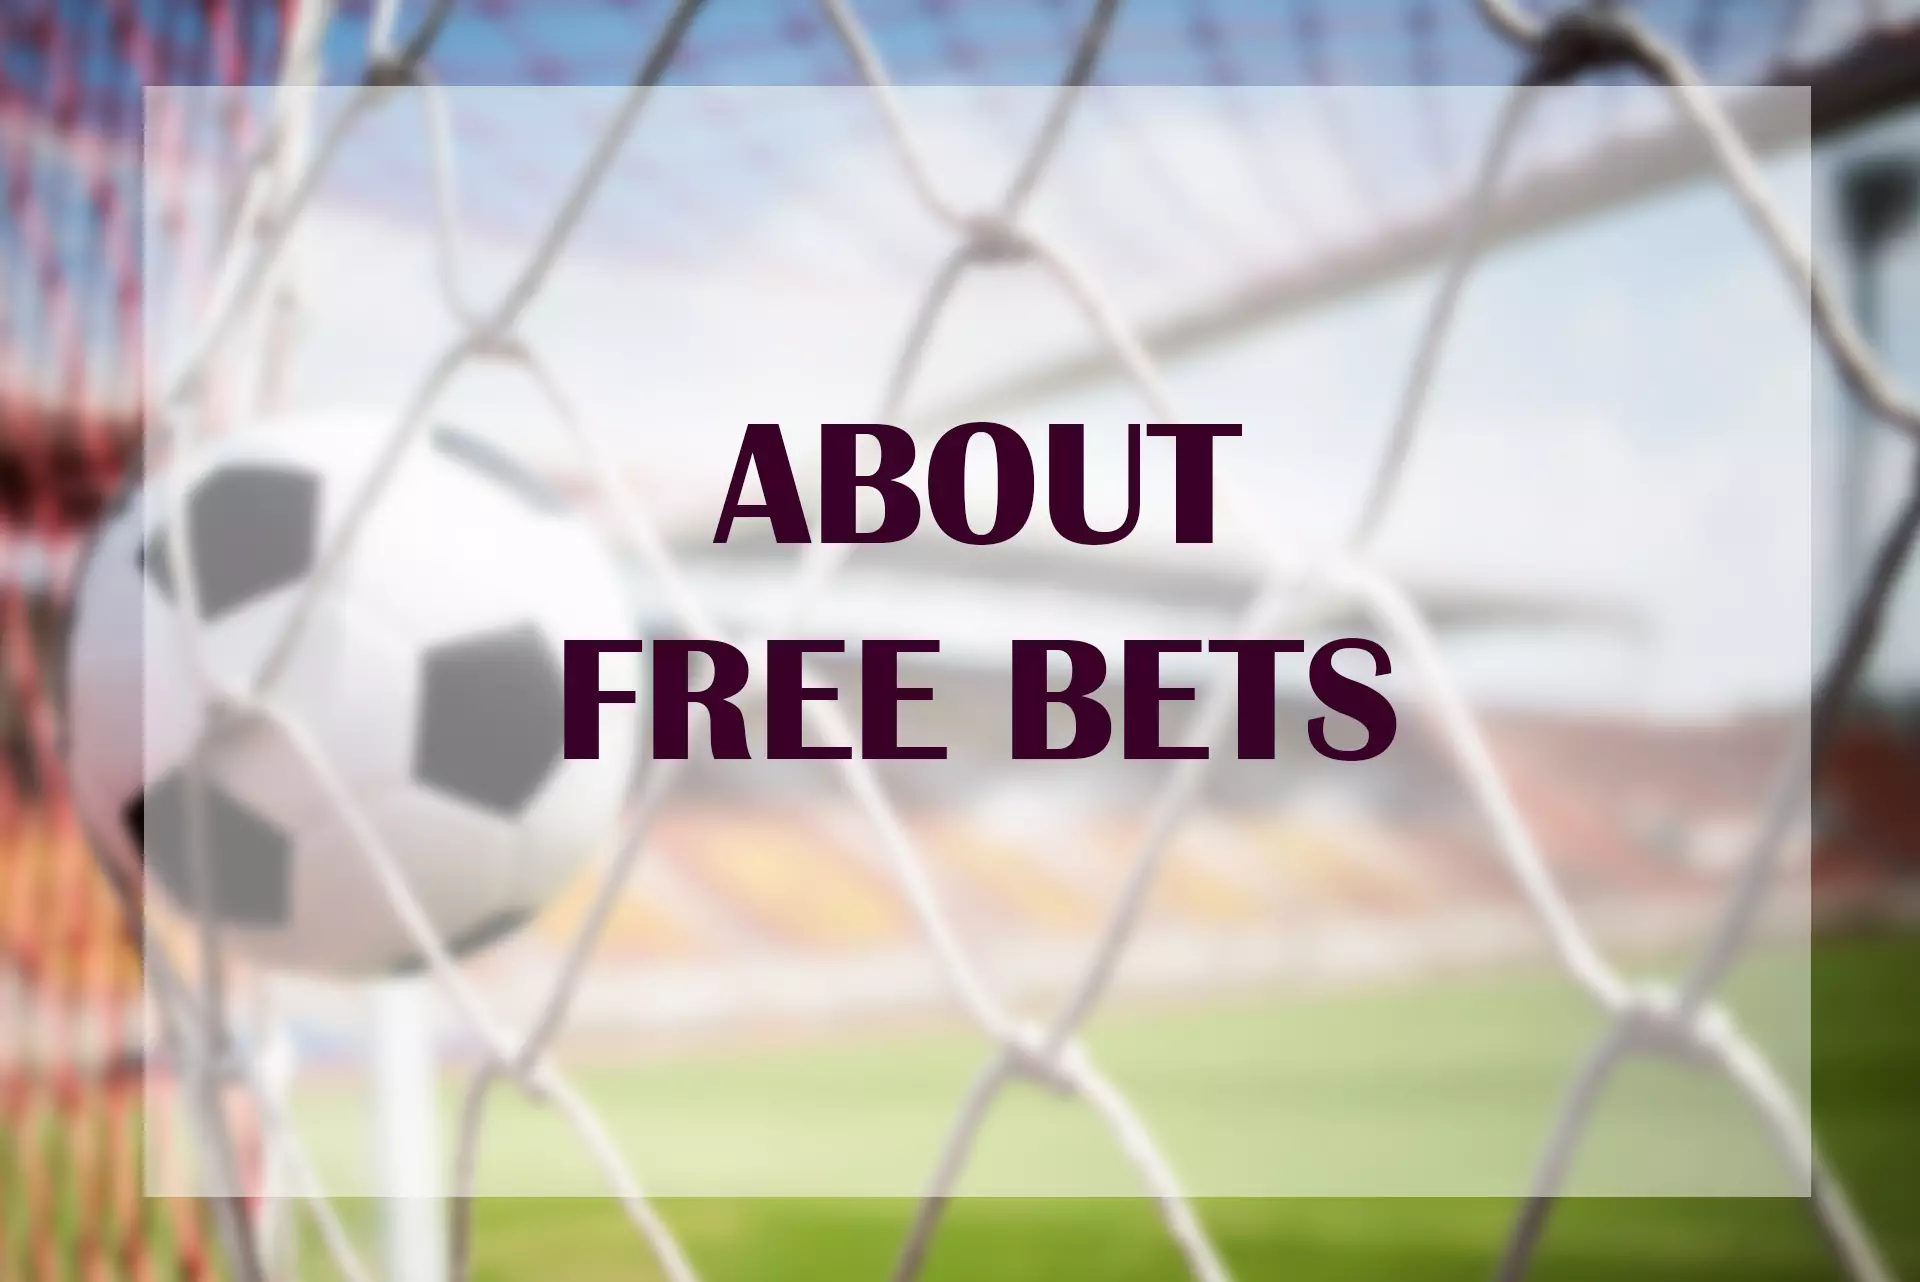 Free bet is a type of bonus that sites give their users.